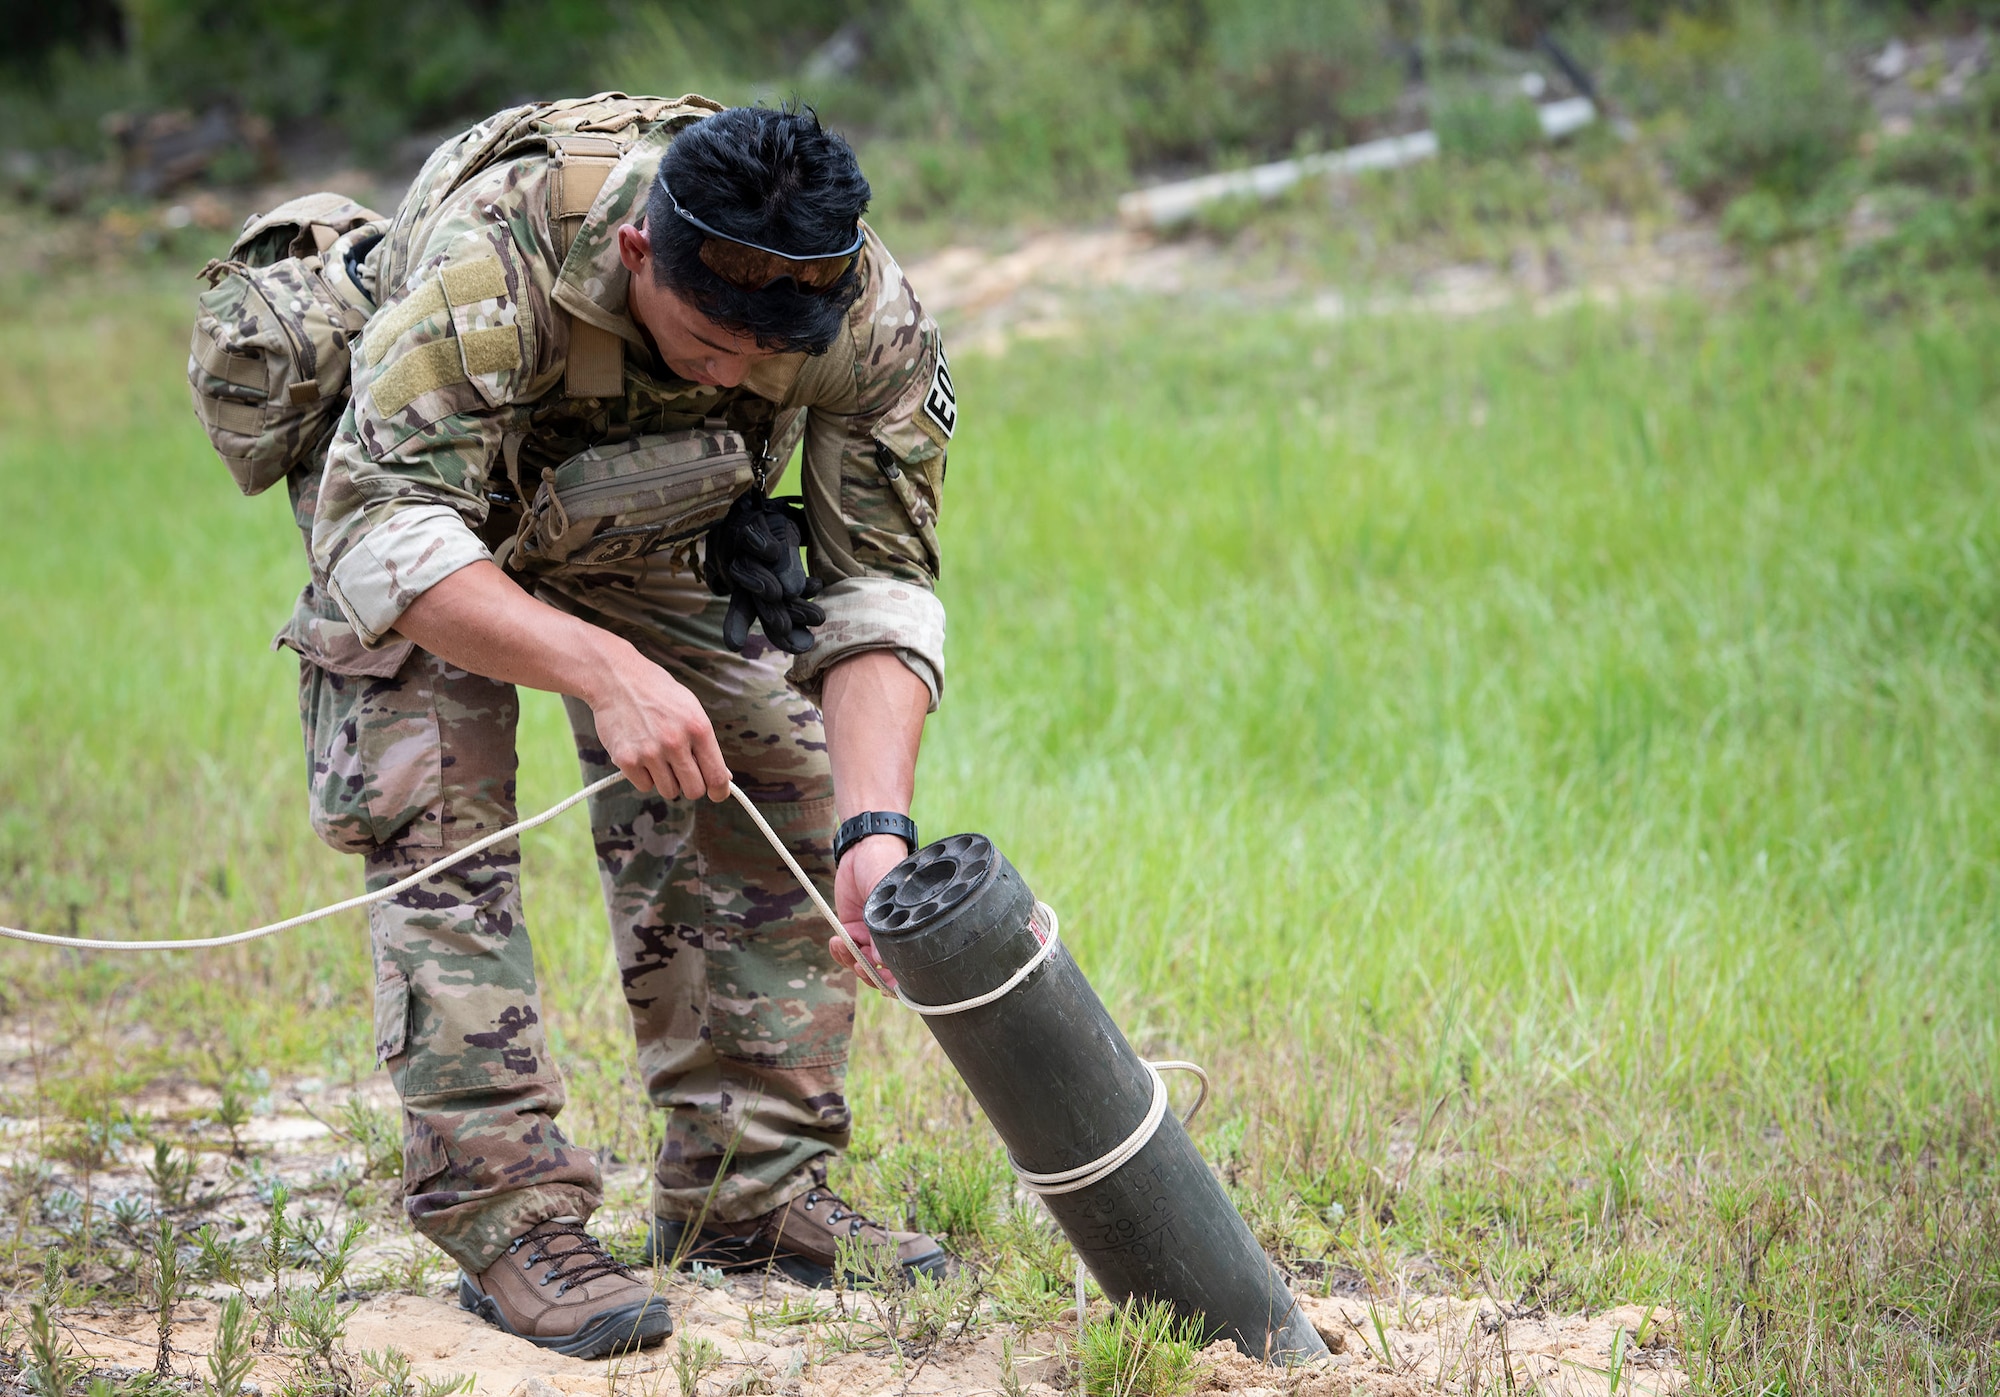 The 96th Civil Engineer Group’s EOD flight recently hosted and participated in the beta test for the Air Force’s prototype of the new EOD ‘Tier 2’ physical fitness test based on job demands Sept. 10 – 12, 2018.